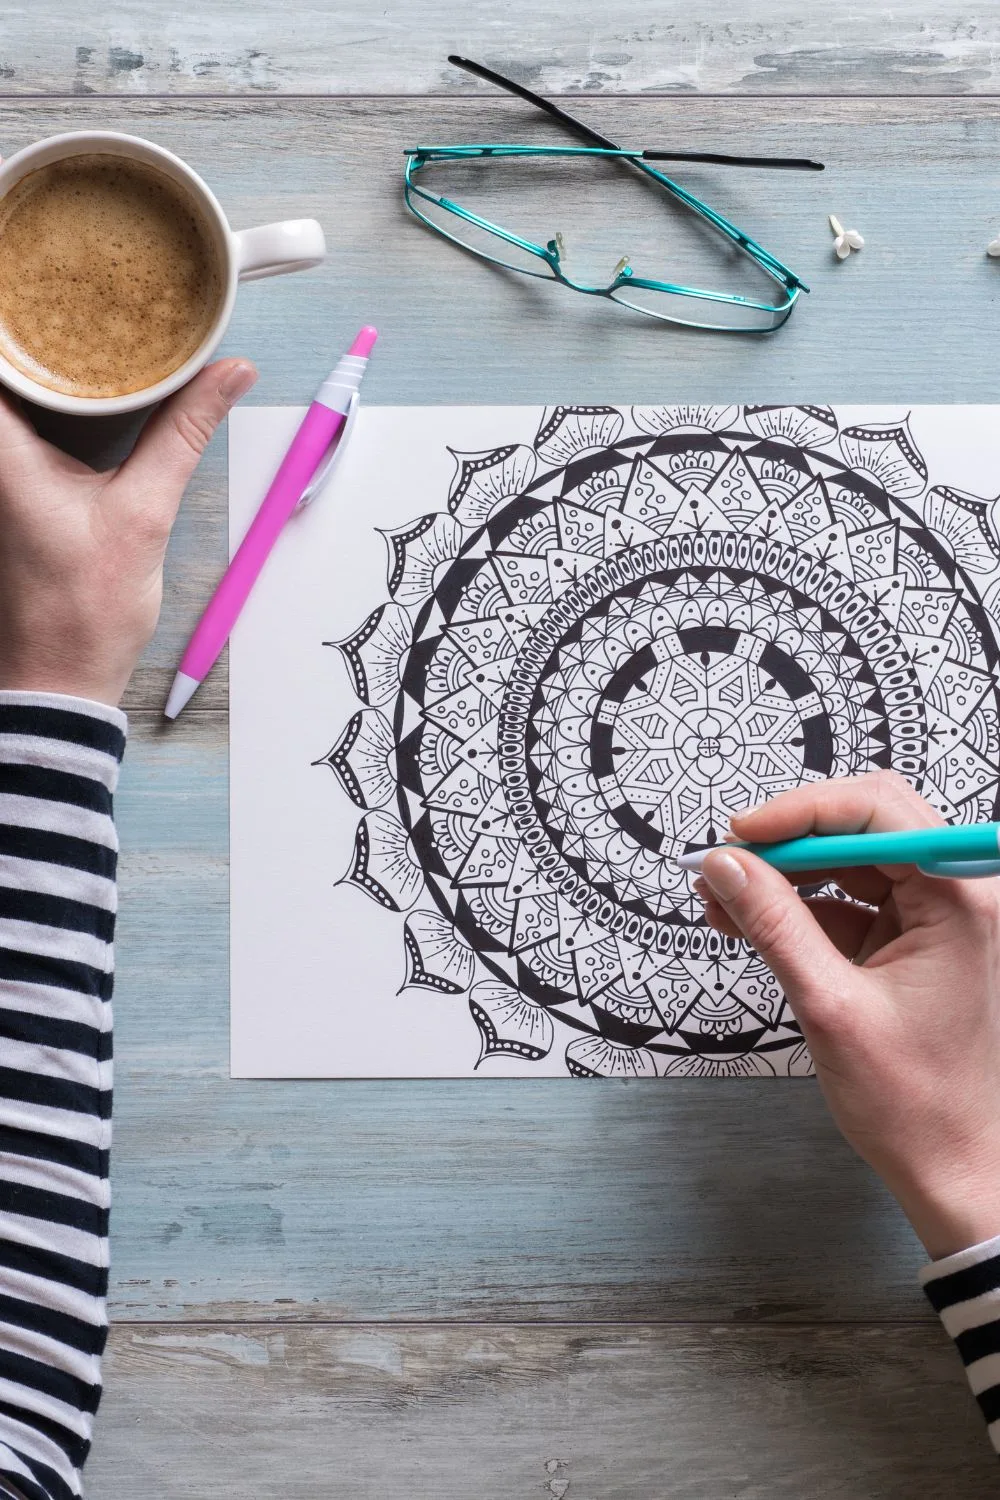 person coloring in a mandala coloring page with a coffee in their hand